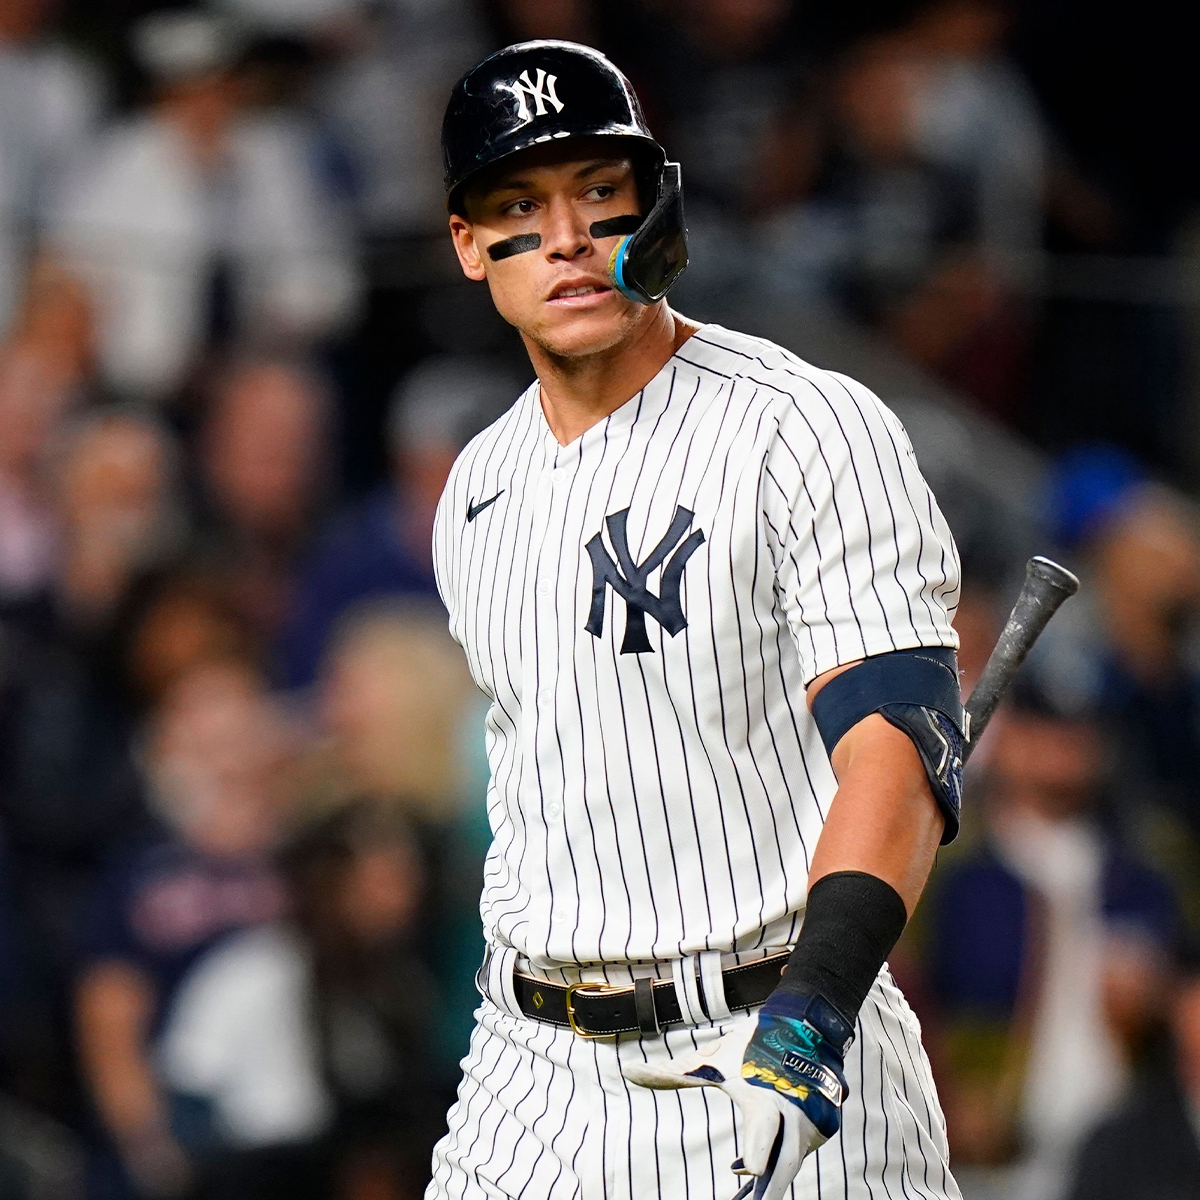 Aaron Judge closes in on the real home run record: Roger Maris's